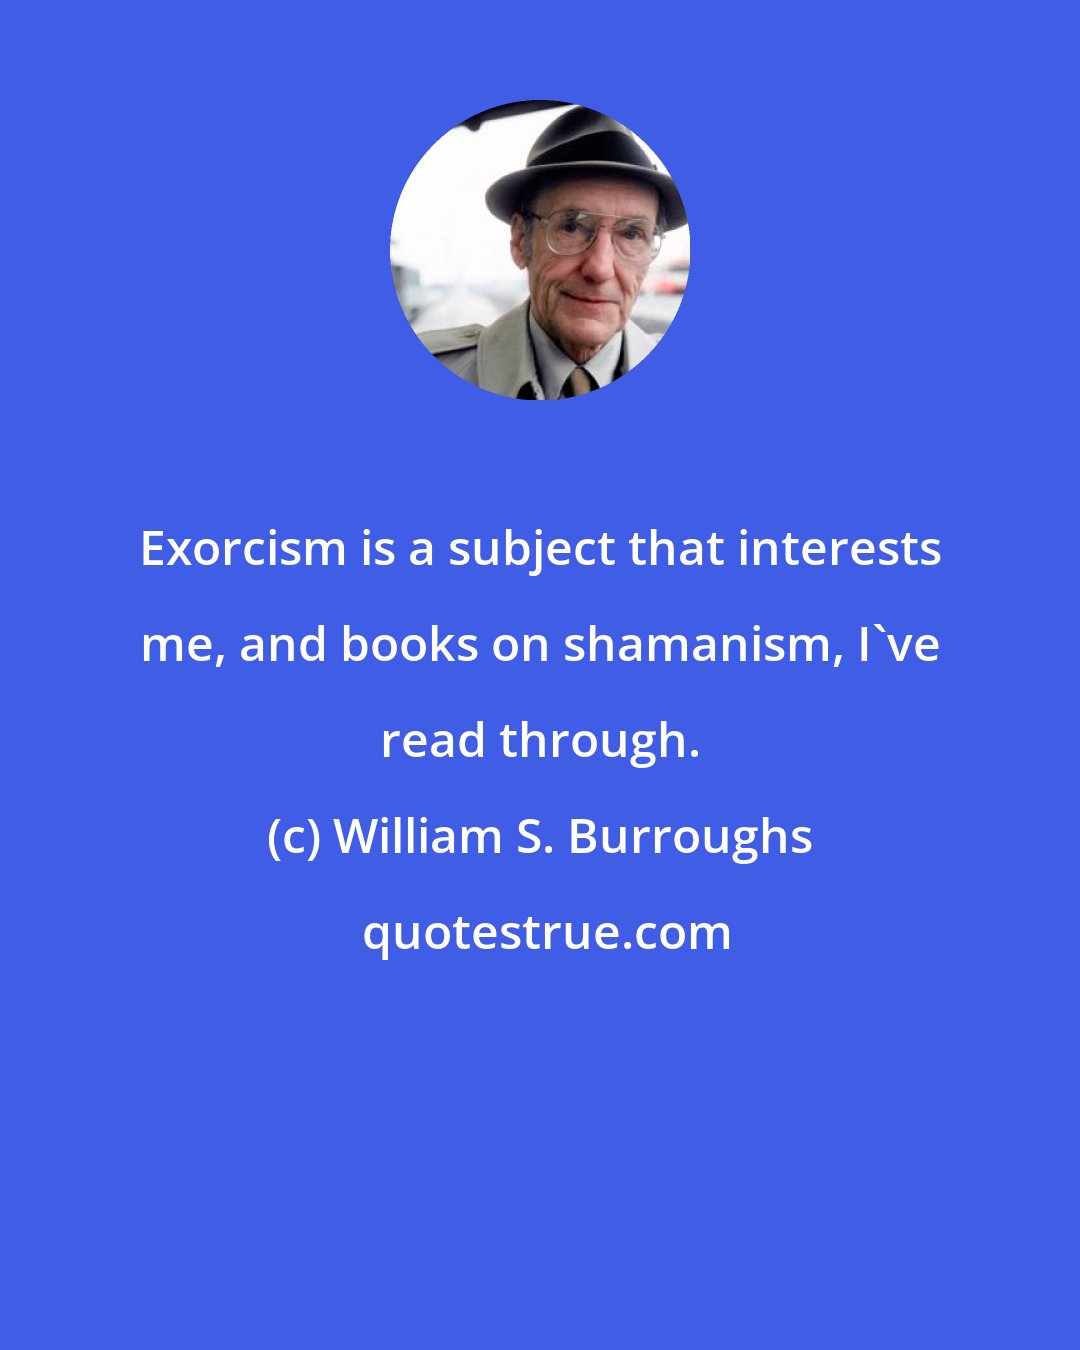 William S. Burroughs: Exorcism is a subject that interests me, and books on shamanism, I've read through.